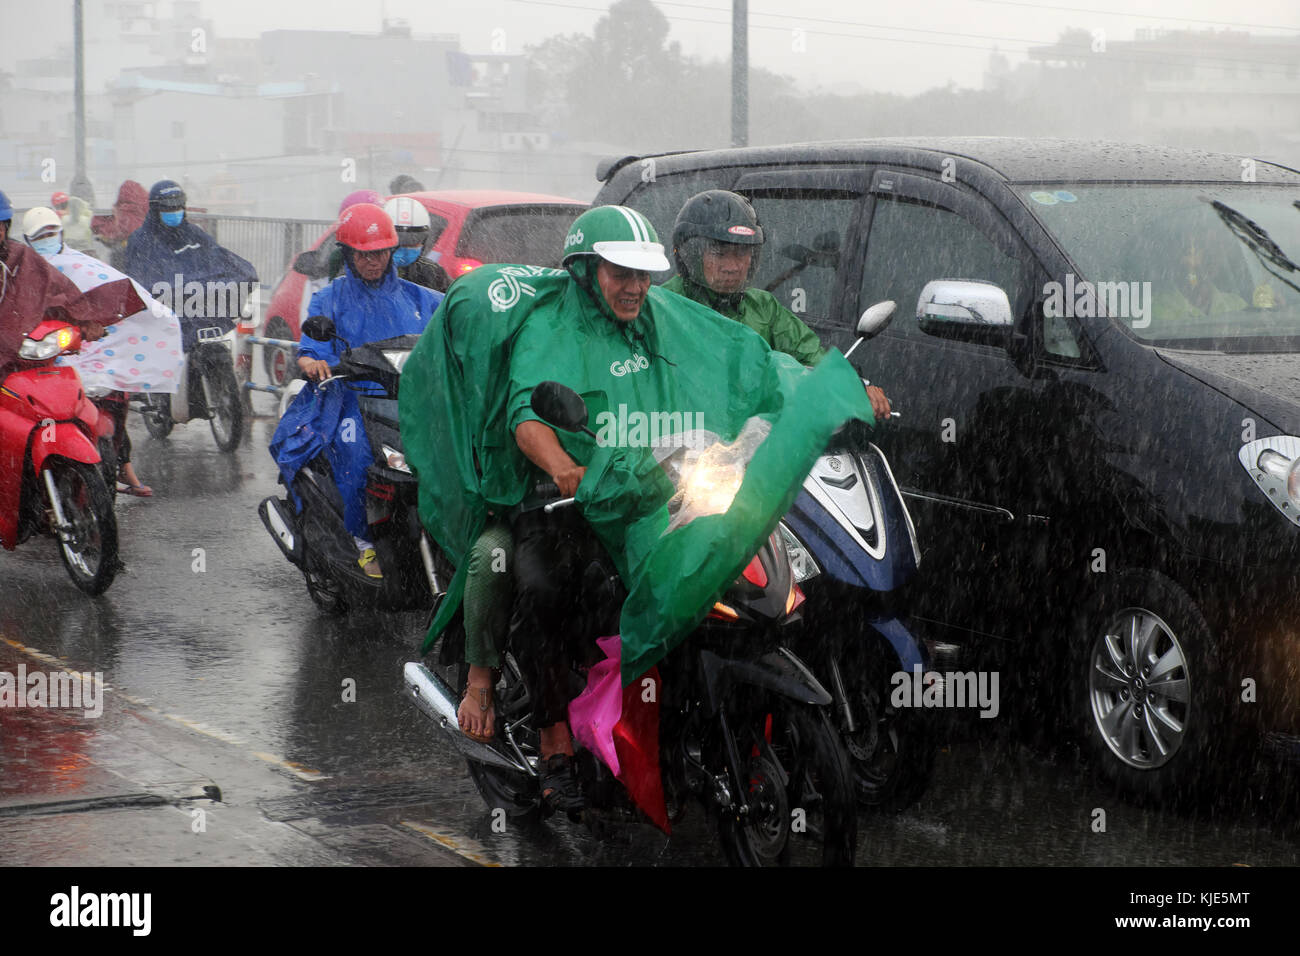 HO CHI MINH CITY, Vietnamese people wear raincoat ride motorcycle, difficult move in heavy rain, high wind from bad weather by tropical low pressure Stock Photo